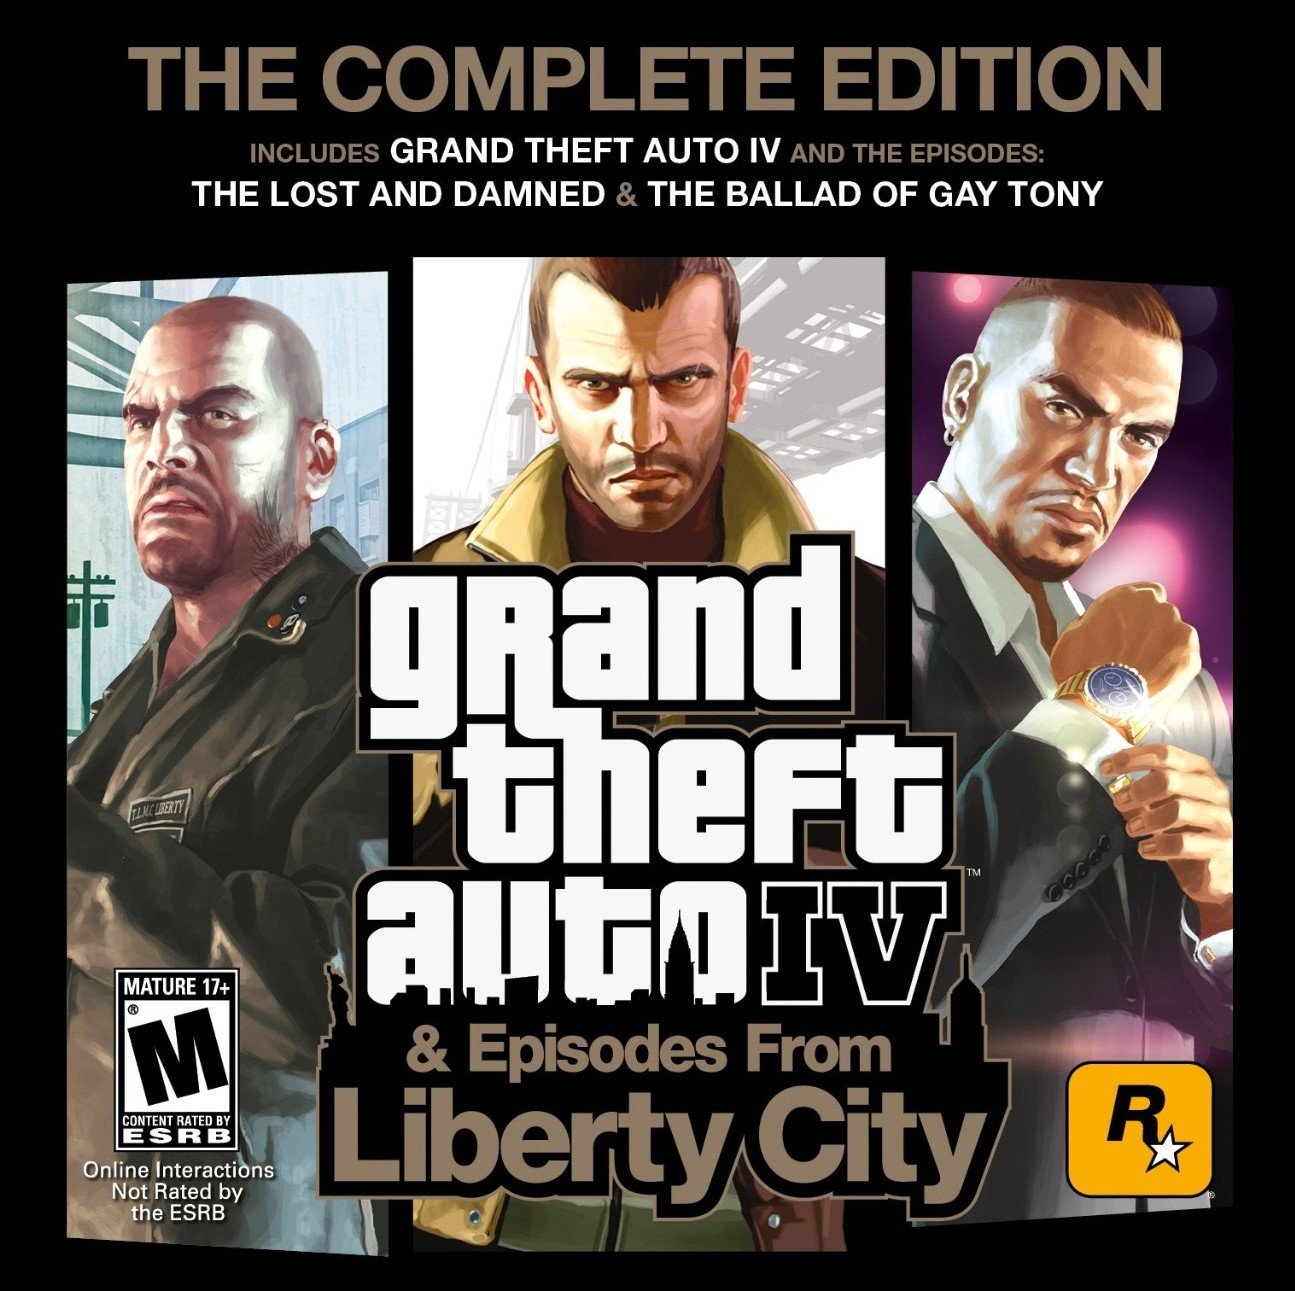 Image of Grand Theft Auto IV: The Complete Edition